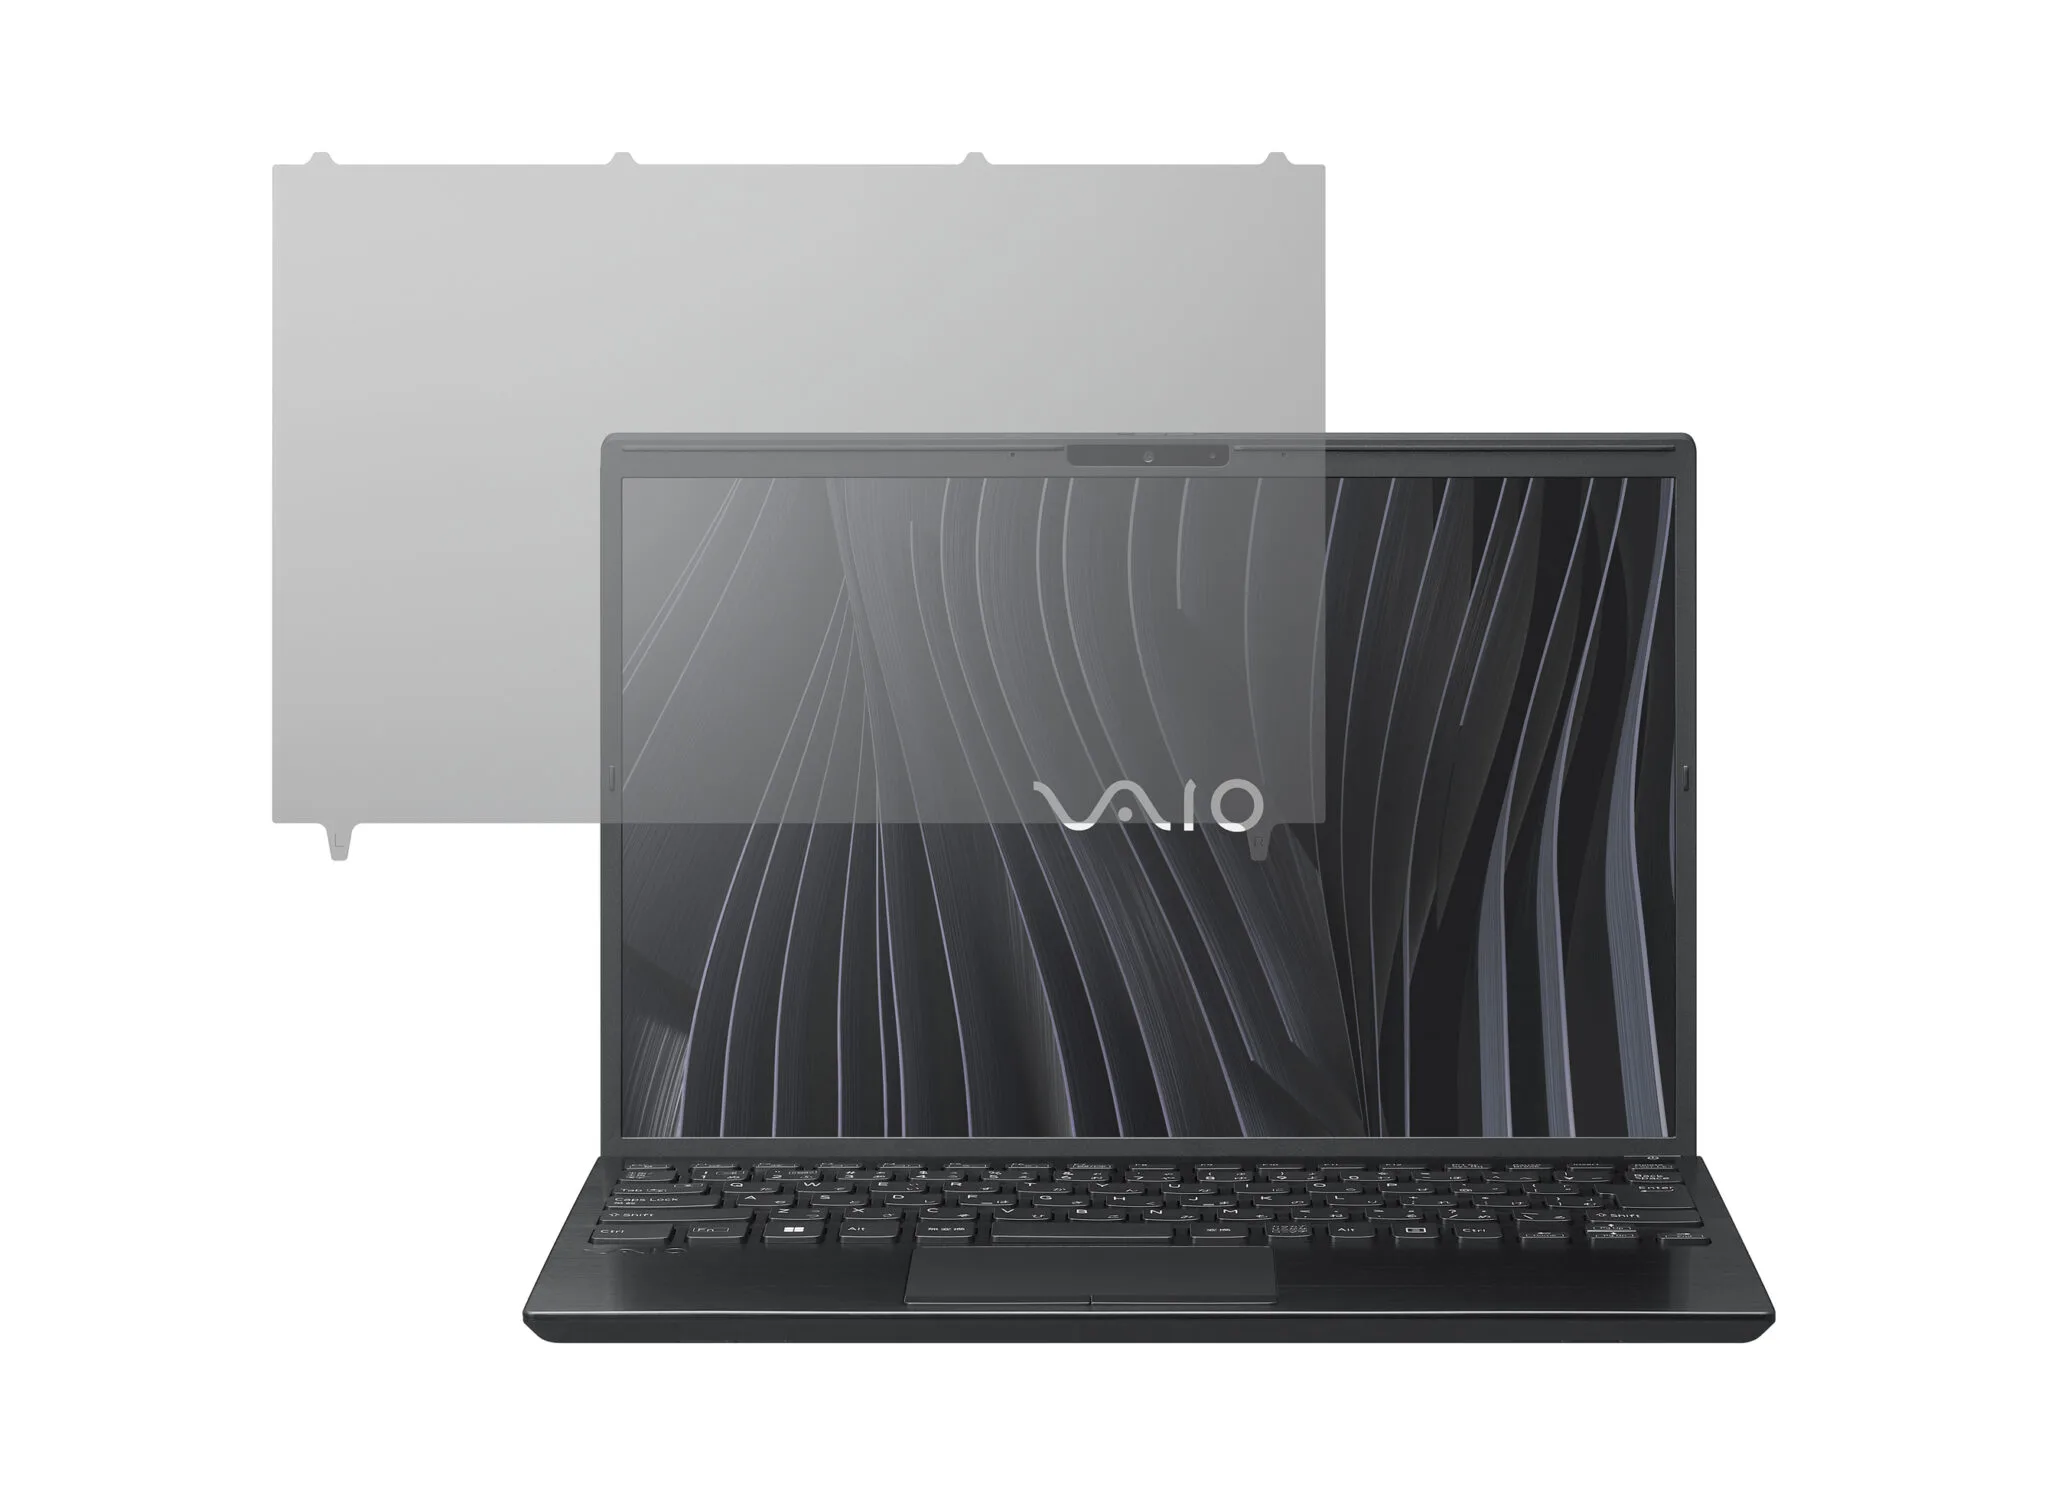 IMAGE BY VAIO